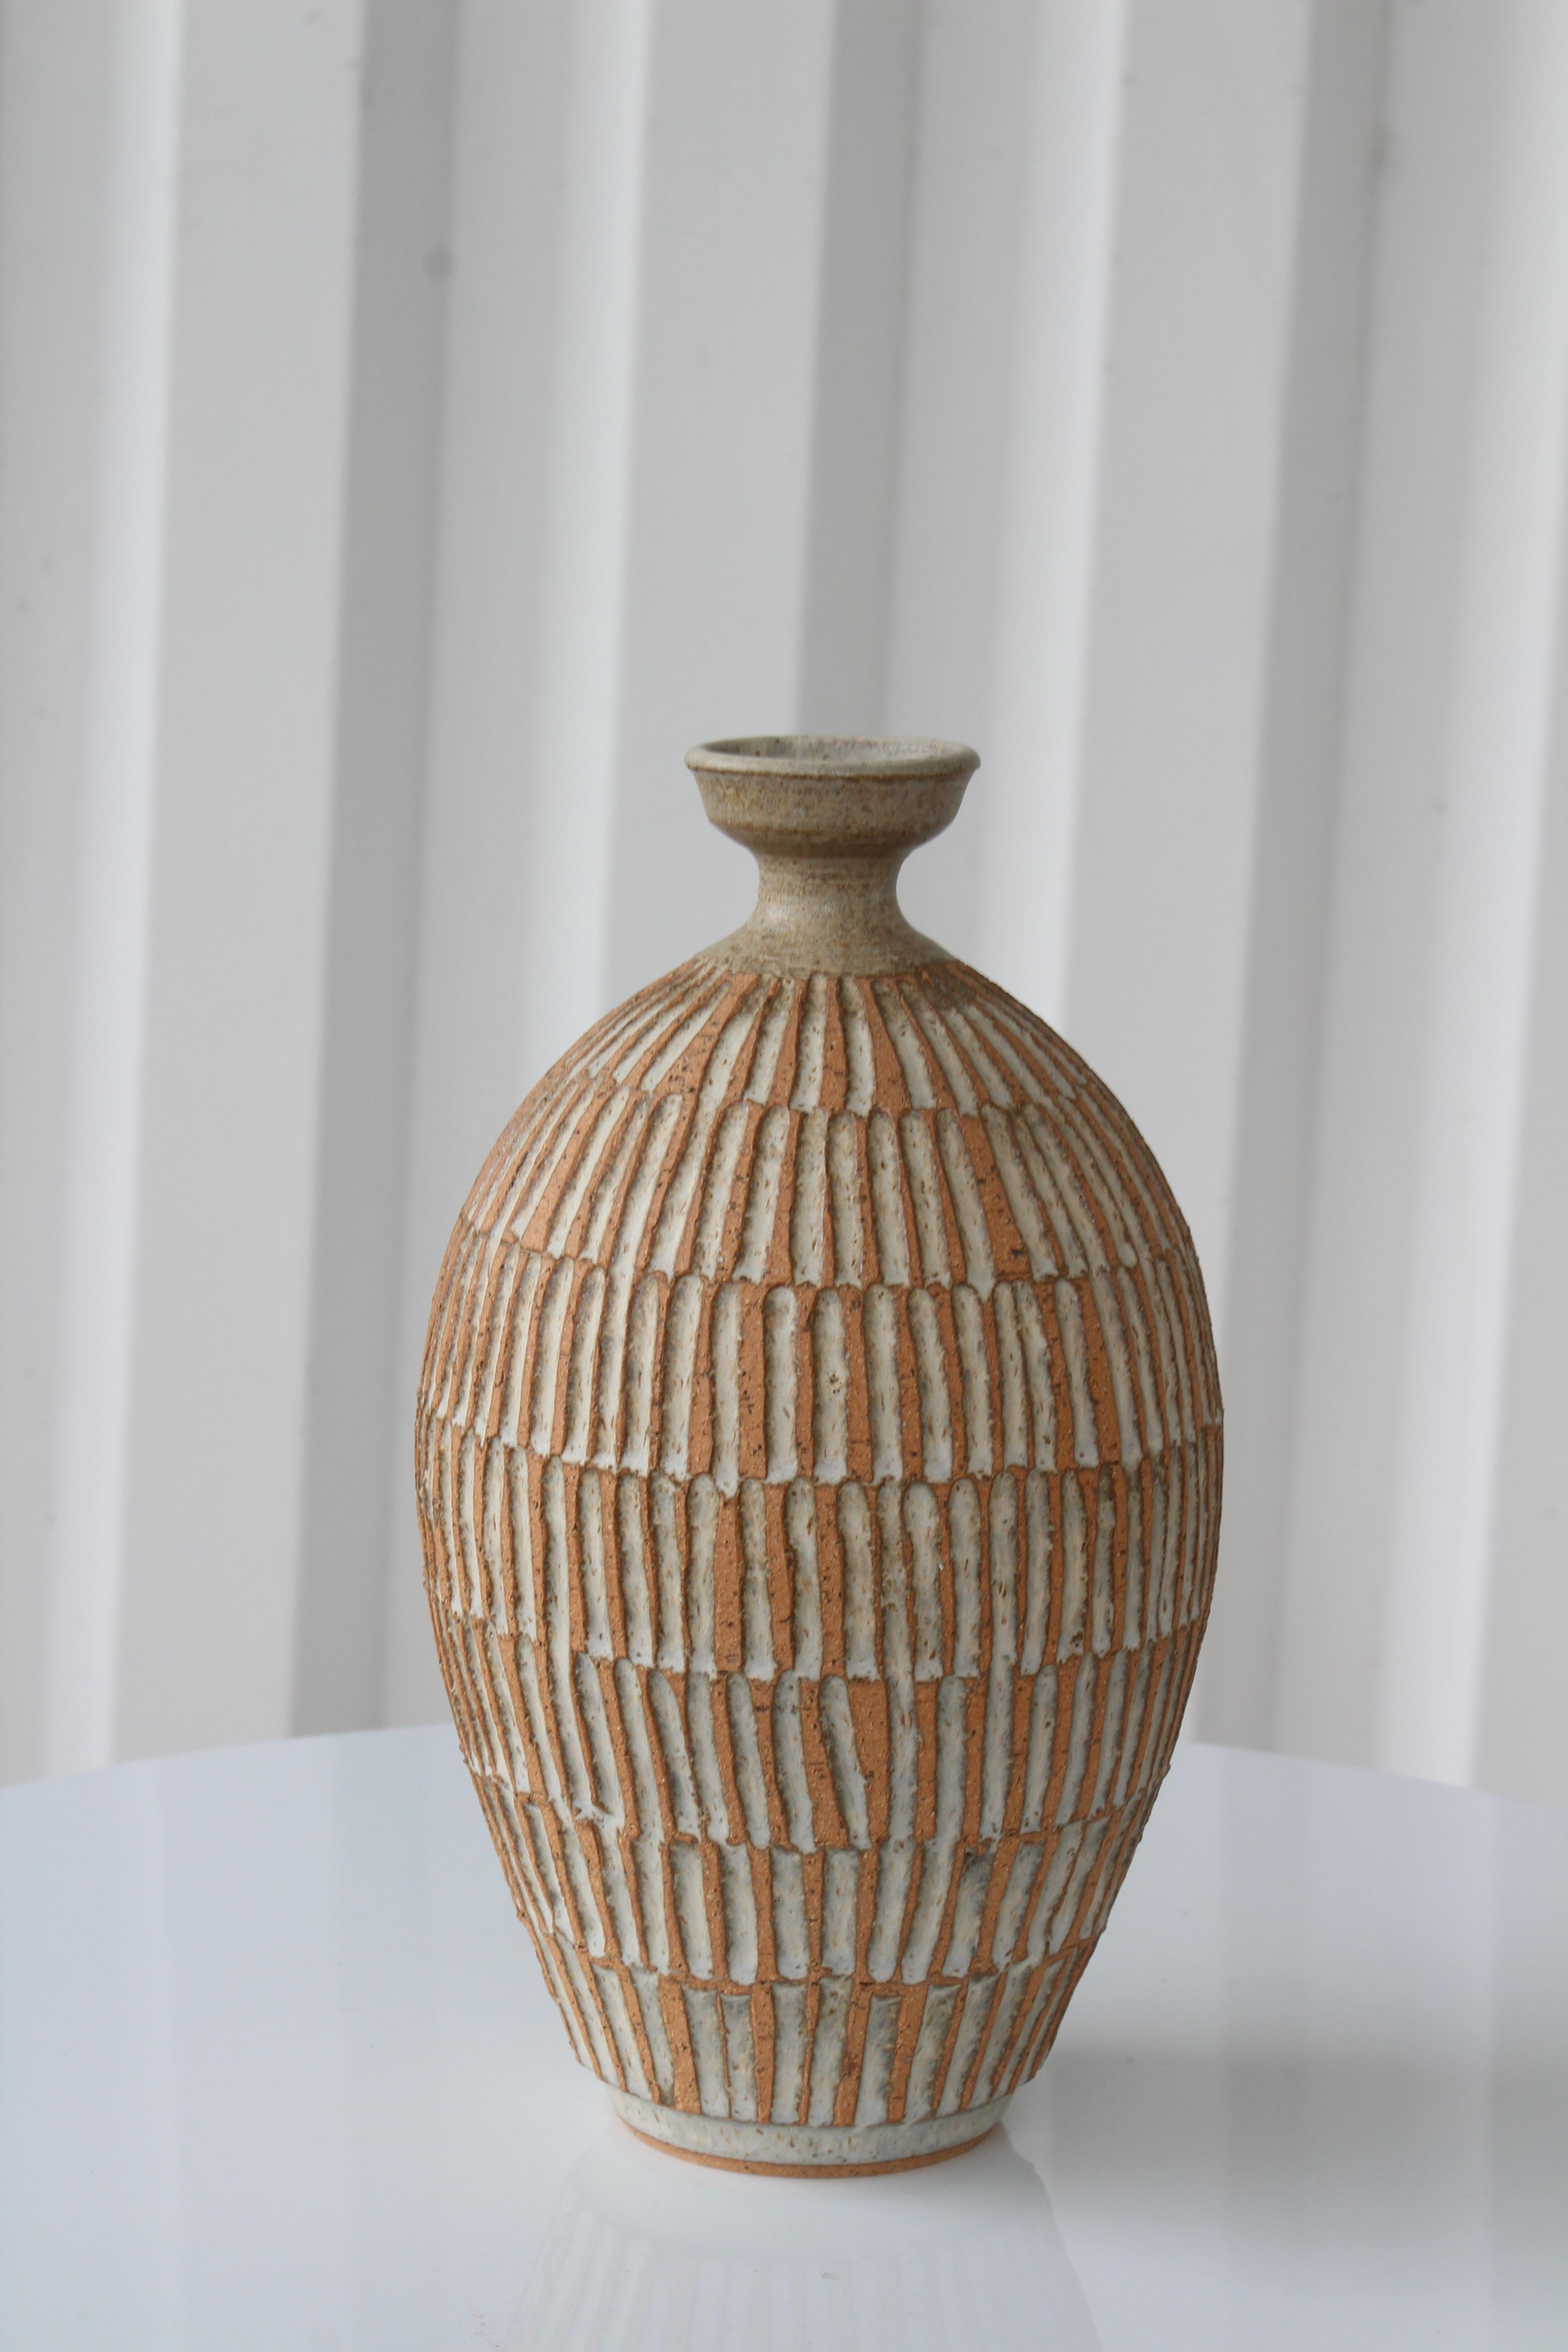 A vintage 1960s studio ceramic vase, signed Willet Studio. In excellent condition. Base is 3 inches in diameter, widest point of the vase is 6 inches in diameter. 10 inches high.